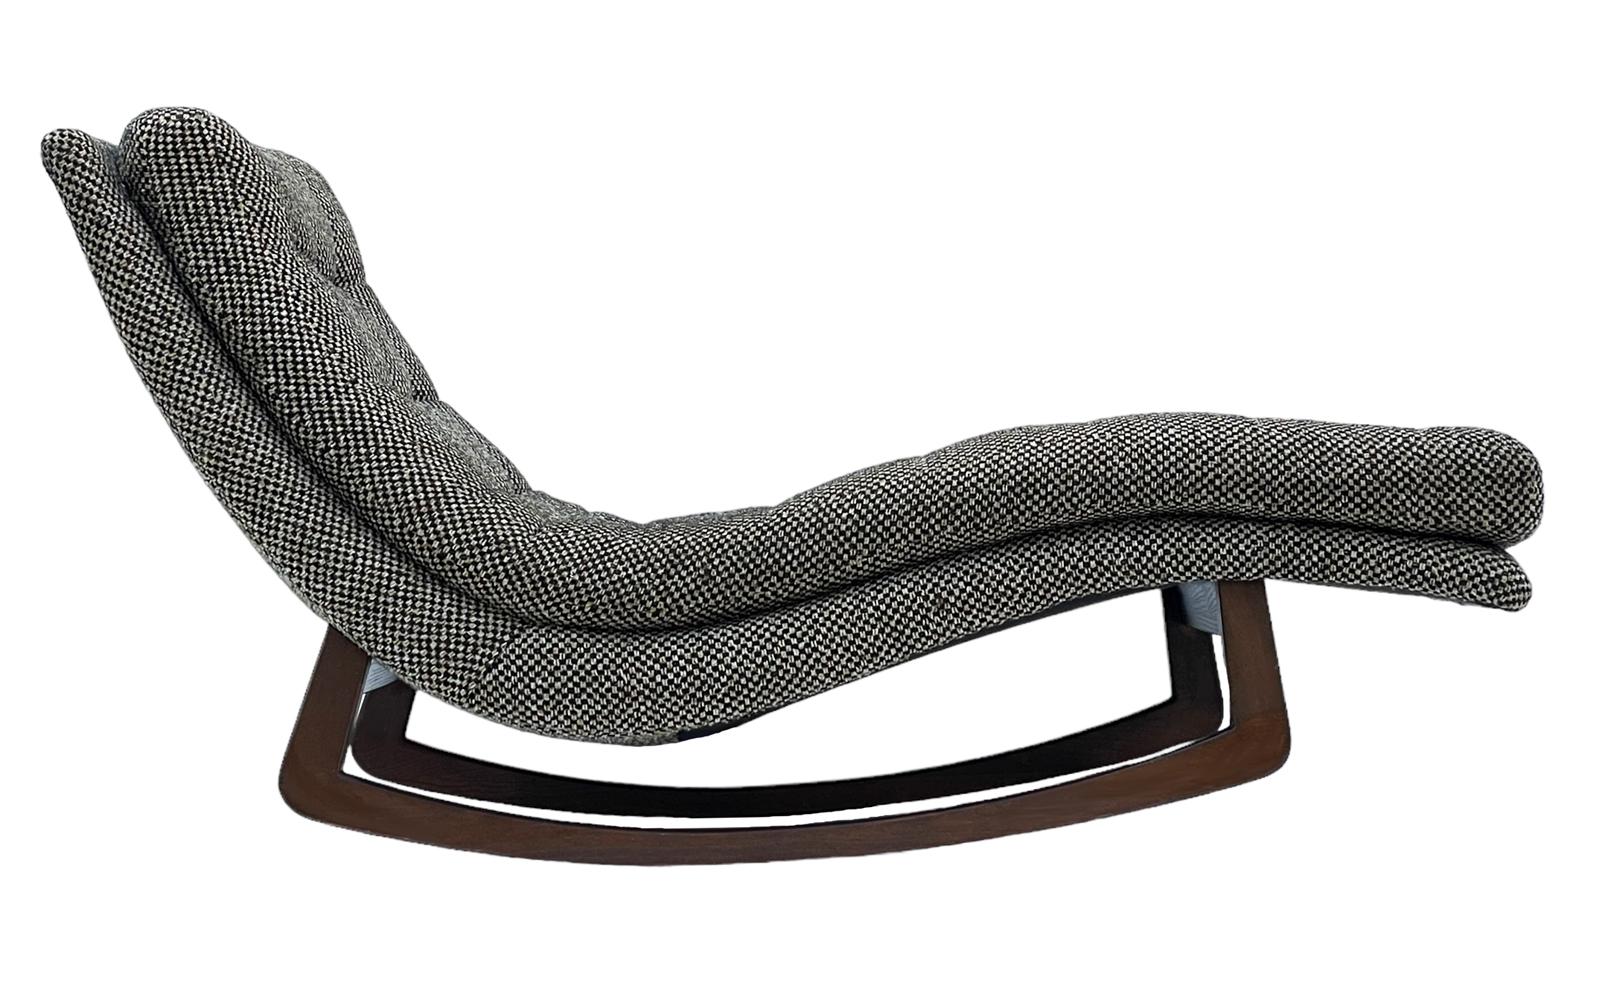 Late 20th Century Mid Century Modern Walnut Rocking Chaise Lounge Chair after Adrian Pearsall For Sale